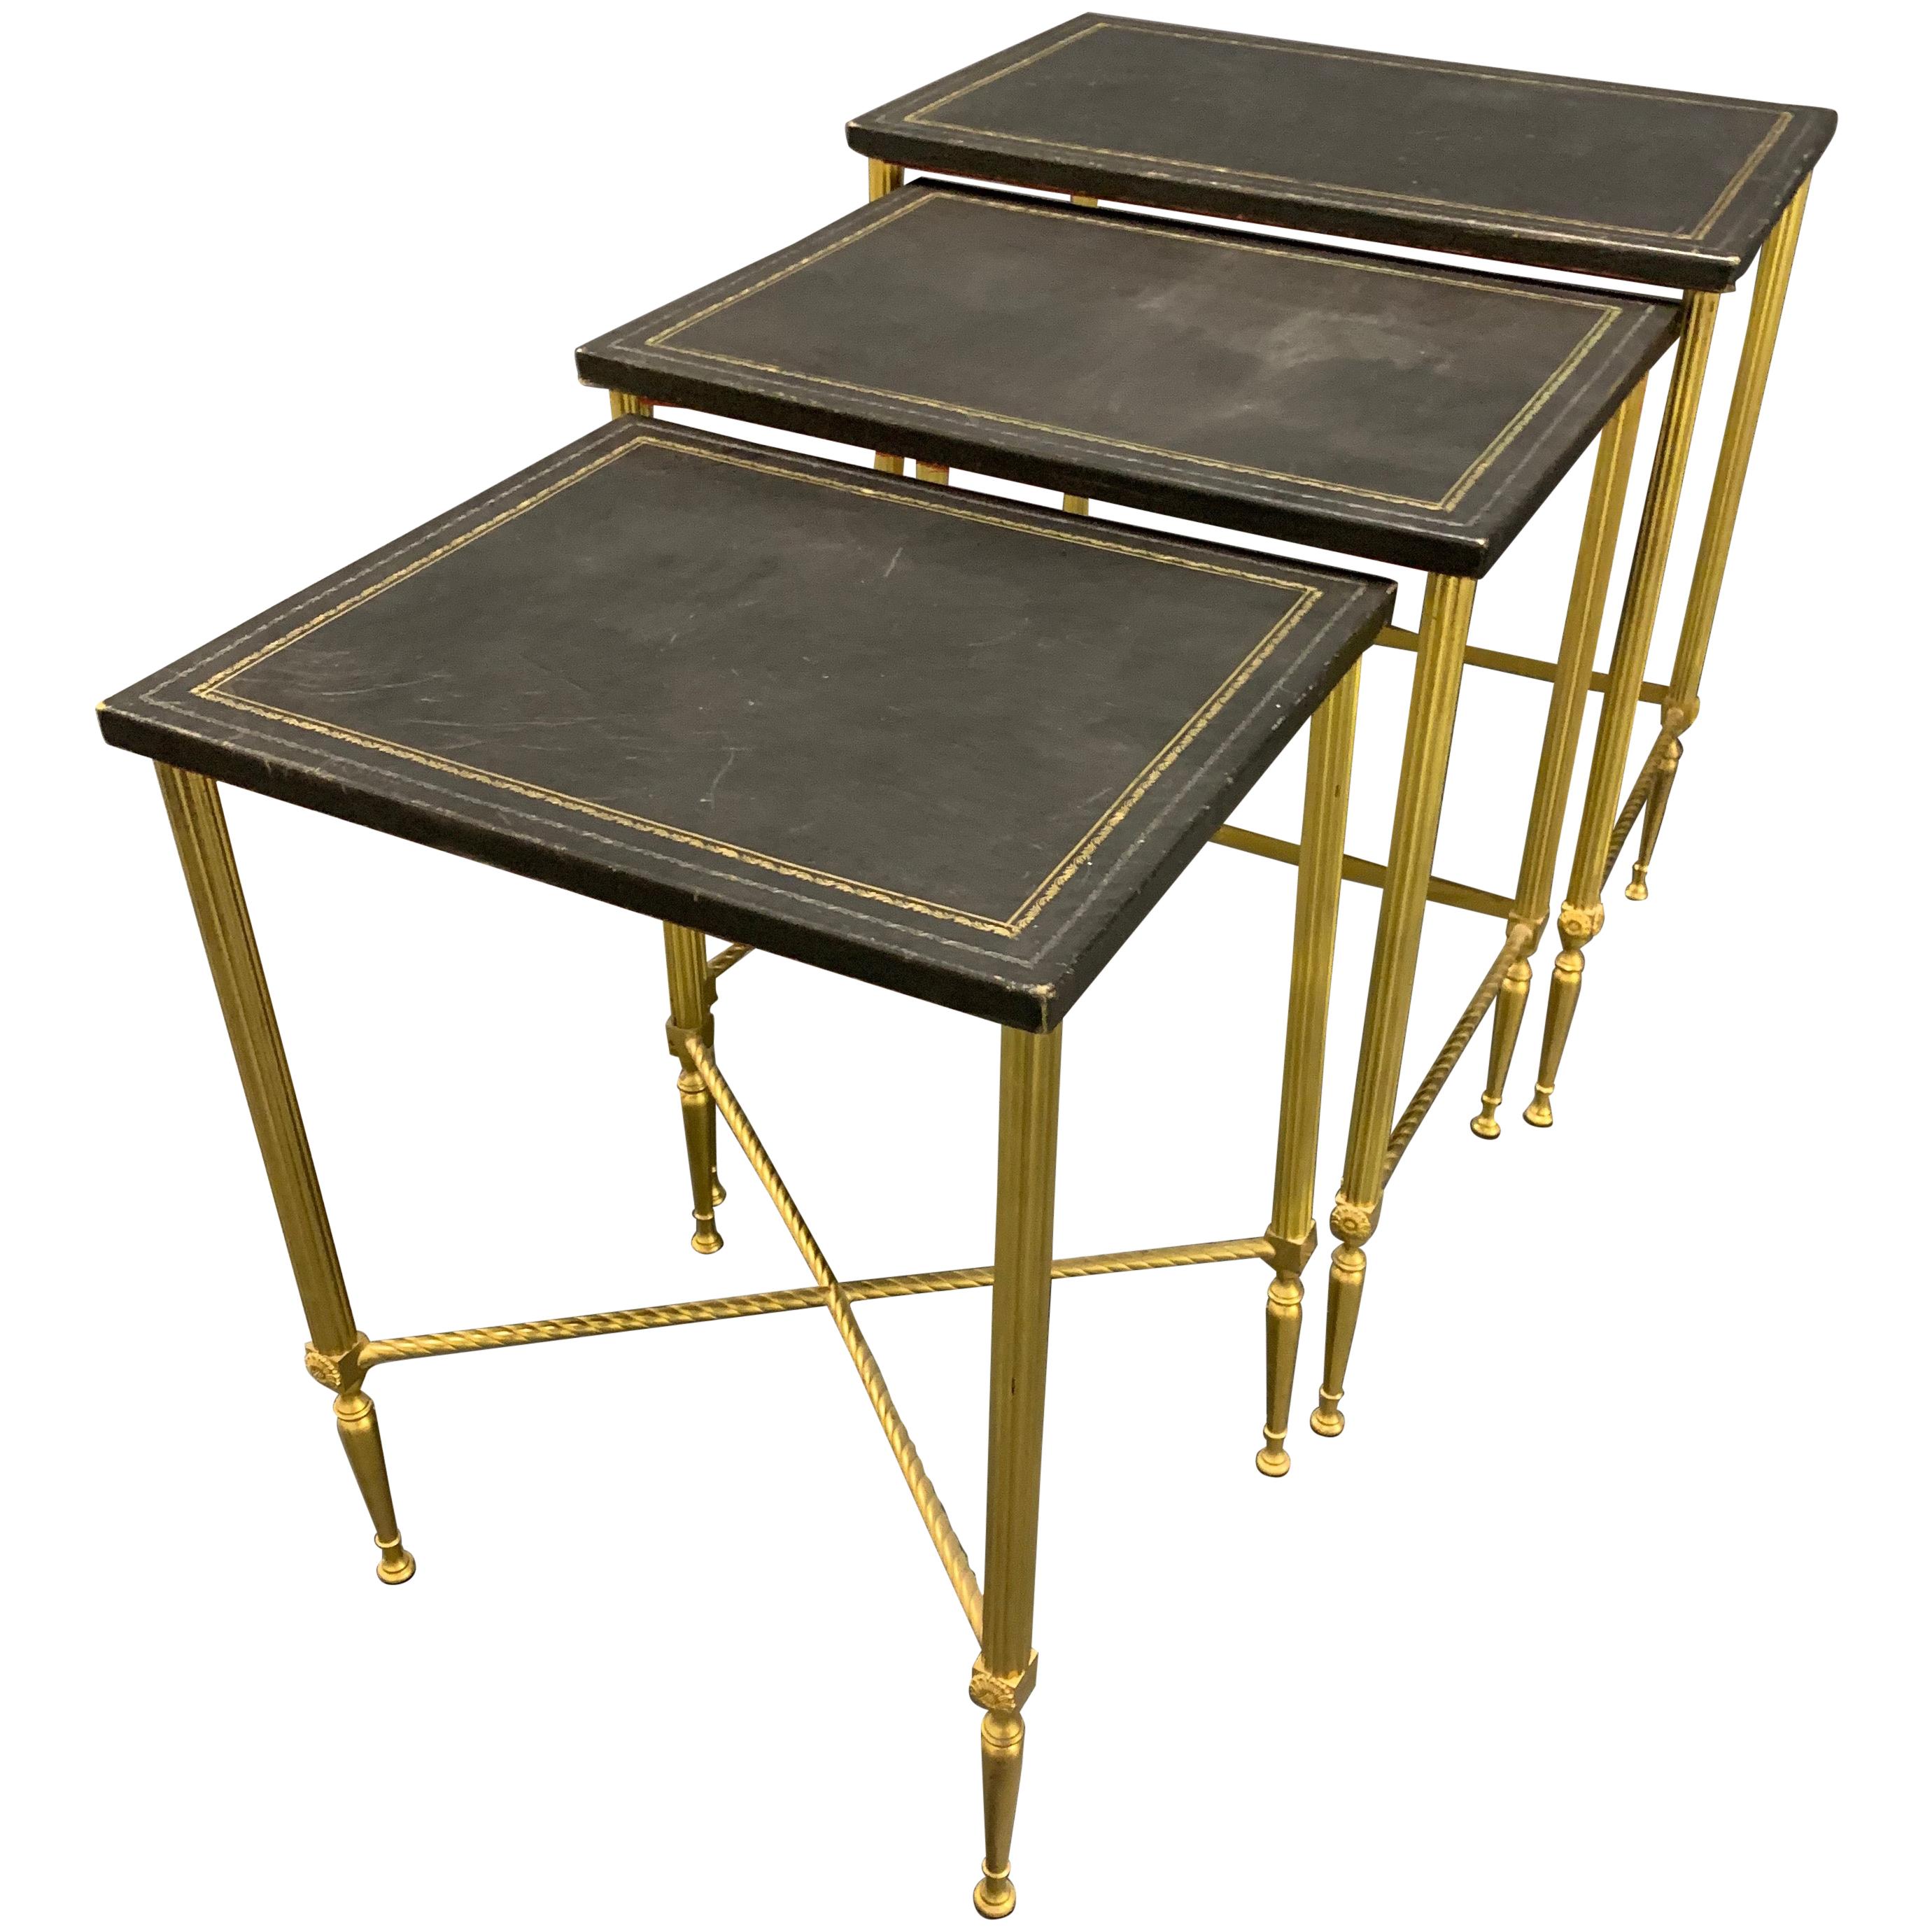 Wonderful "Soleil" Nesting Tables by Maison Charles